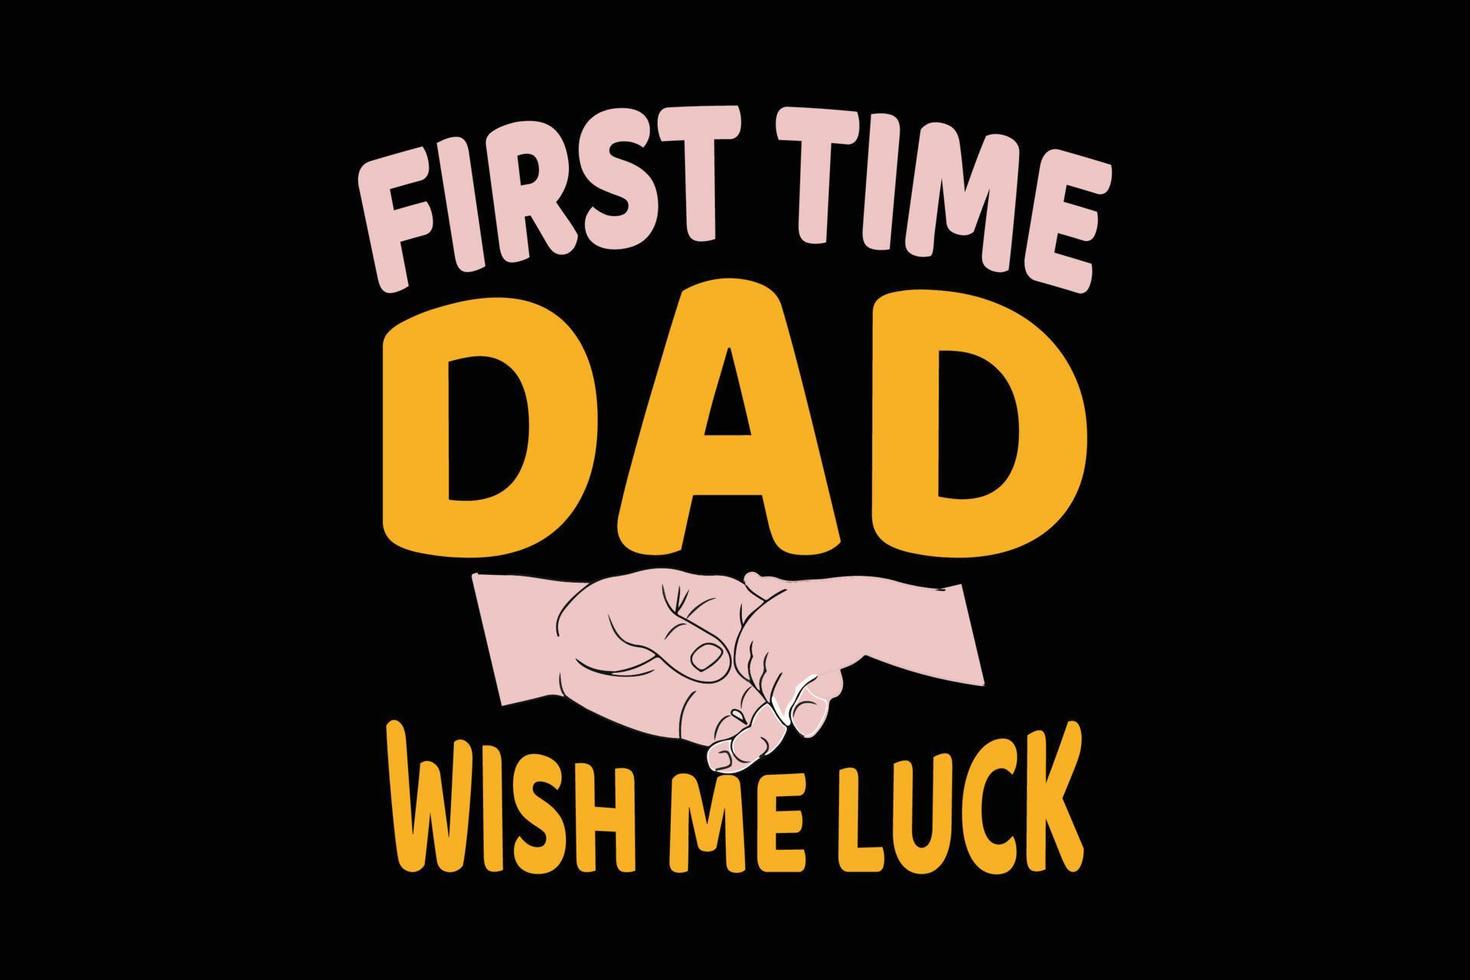 FIRST TIME DAD WISH ME LUCK T SHIRT DESIGN vector